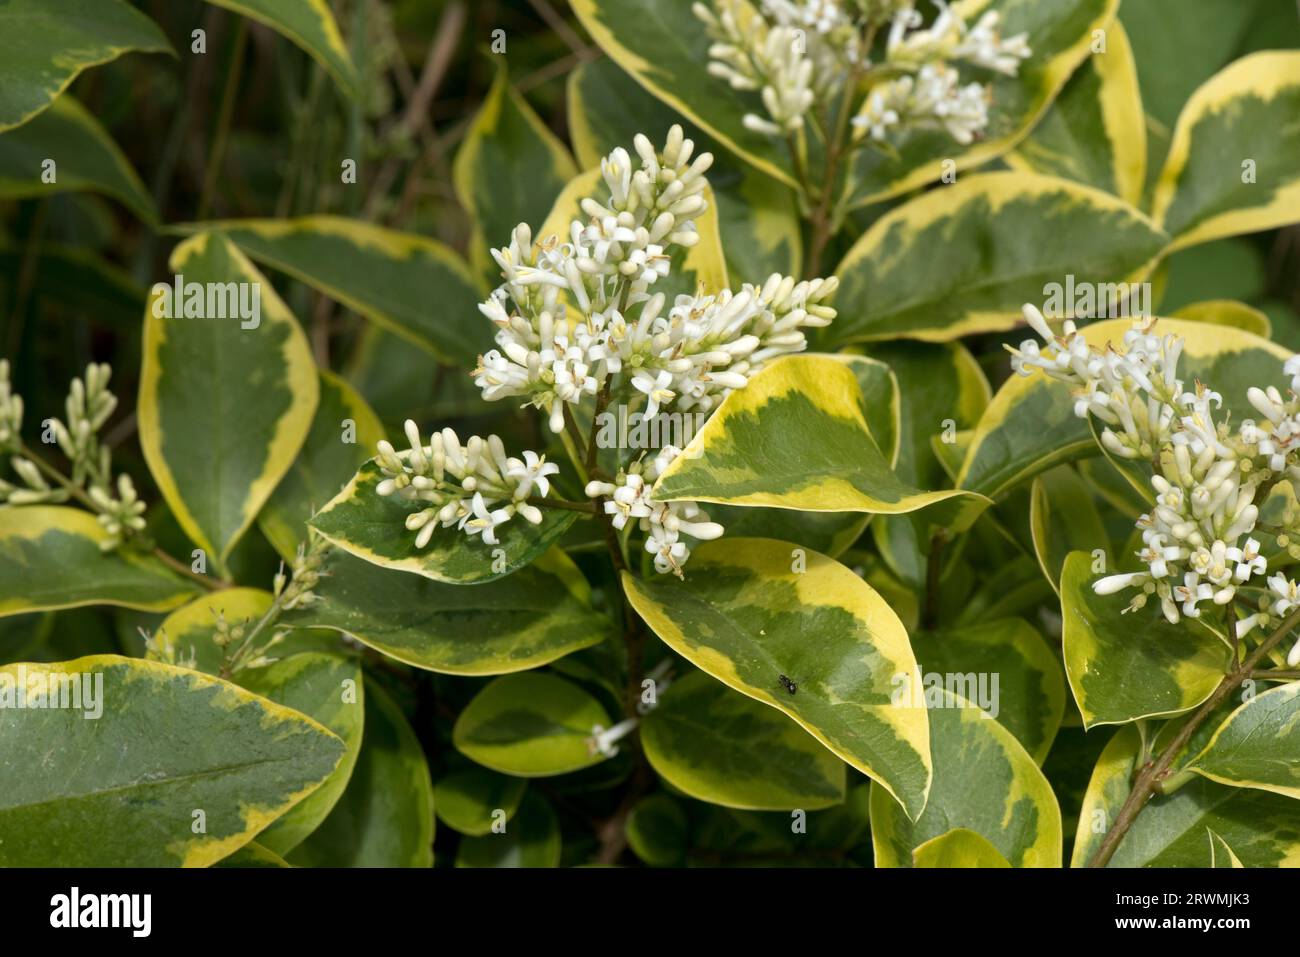 Variegated Japanese or wax-leaved privet (Ligustrum japonicum variegatum) with white scented flowers and yellow/green leaves in a garden hedge, Berksh Stock Photo